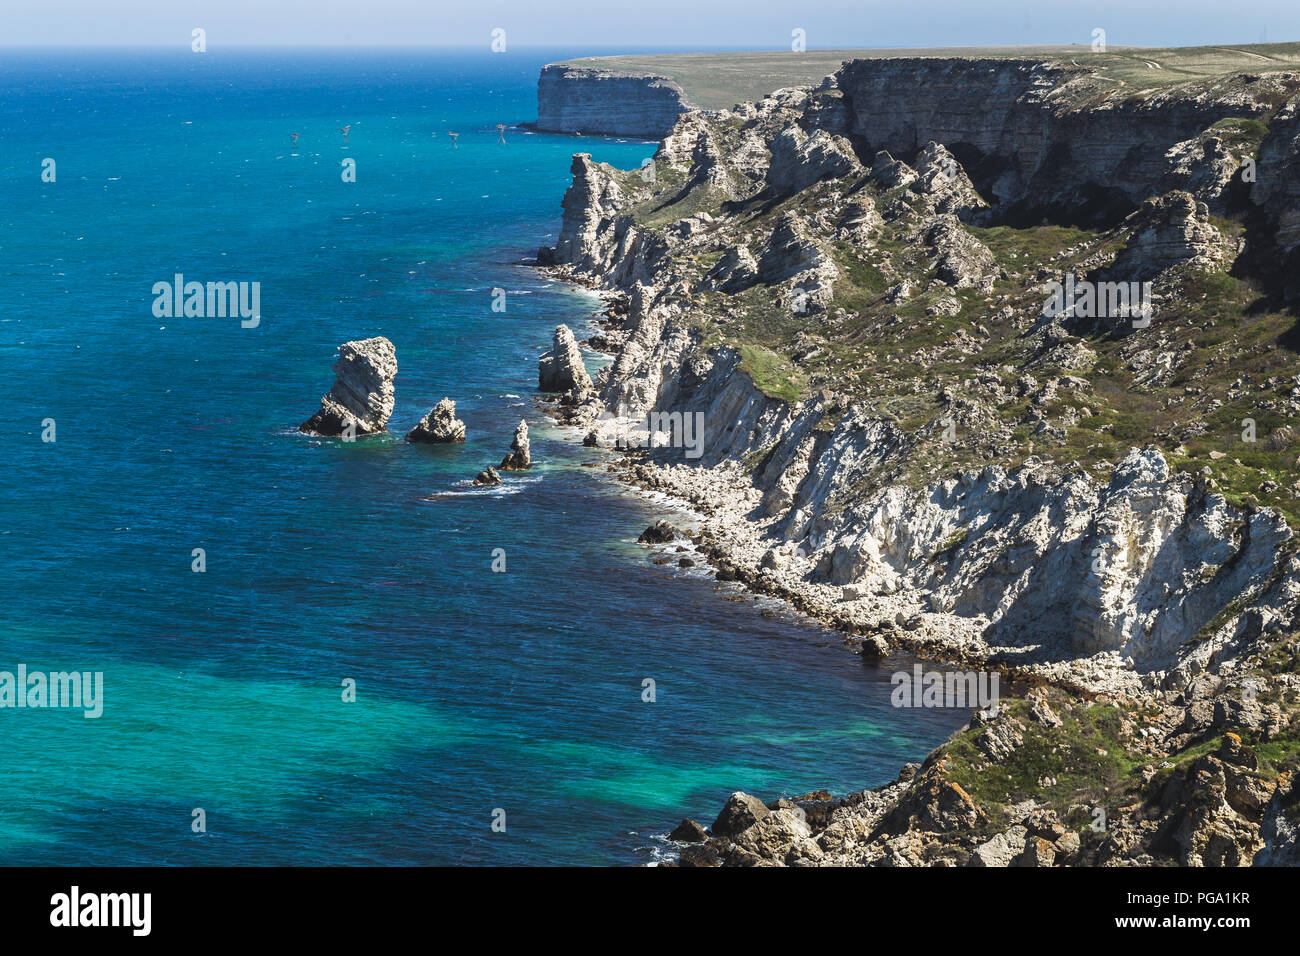 Coast Dzhangul in Crimea. Idyllic paradise landscape with crystal clear water and cliff beach Stock Photo